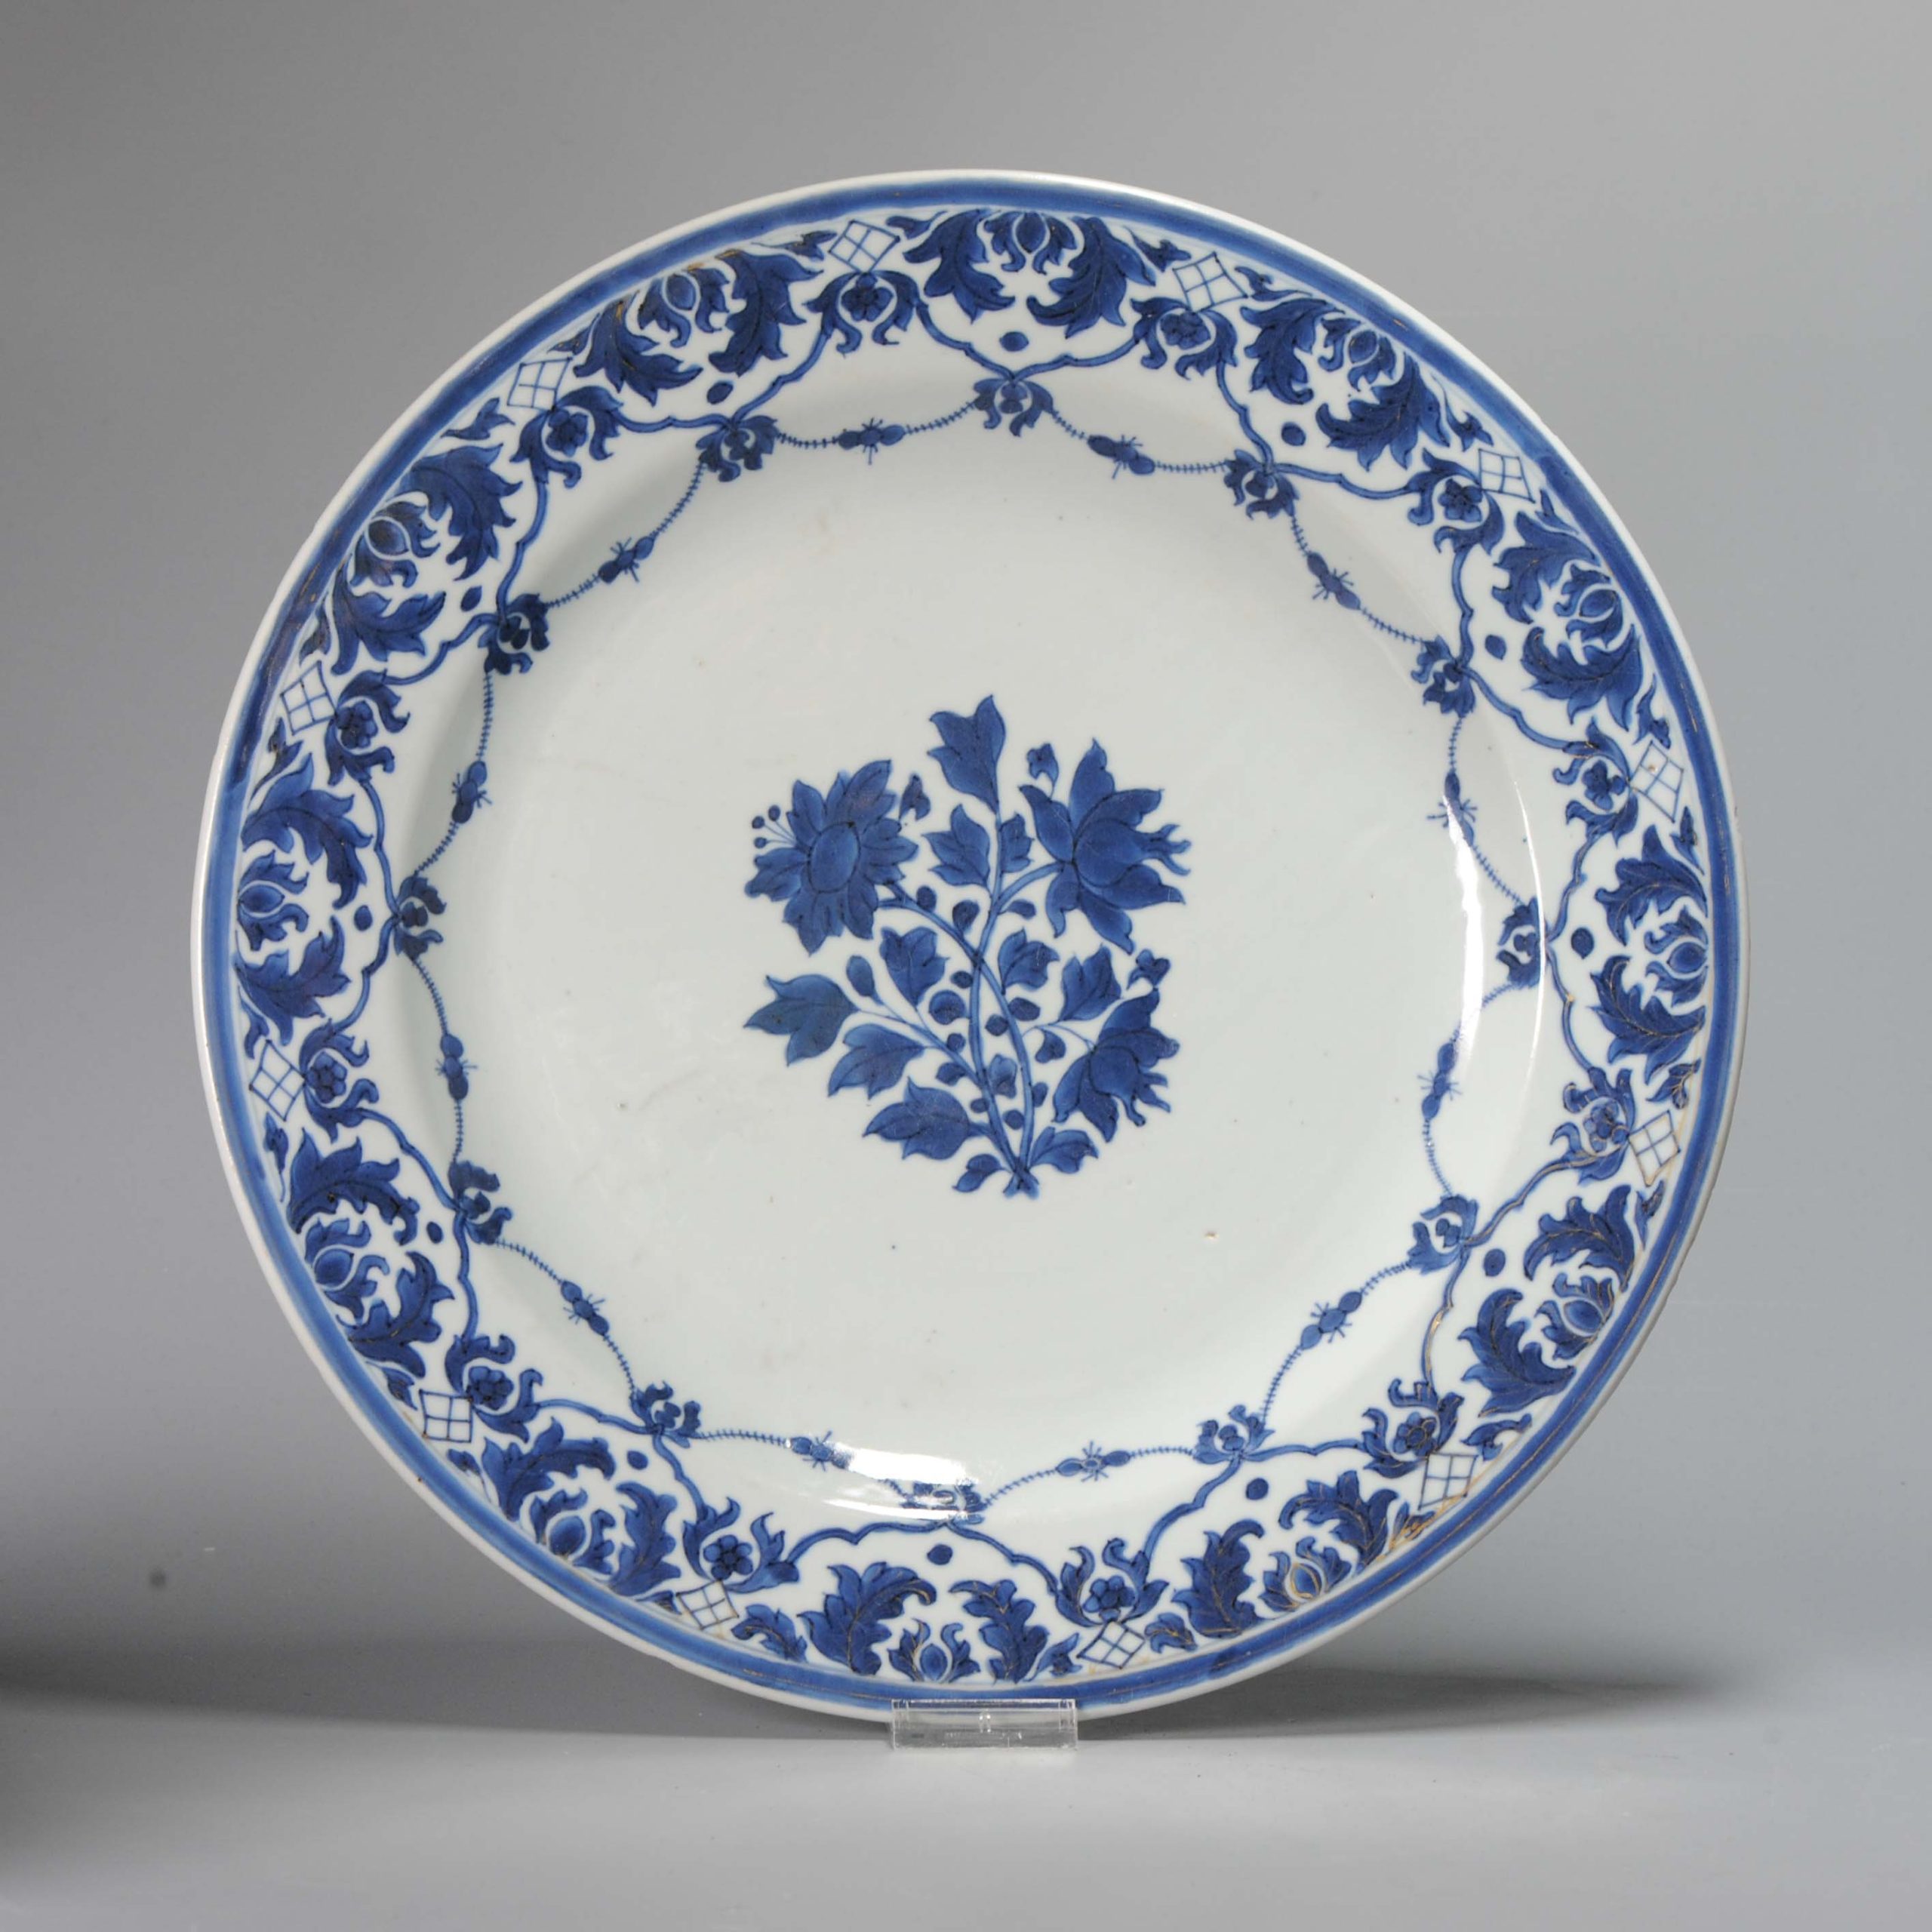 Large Antique Qianlong 18th C Chinese Porcelain Blue White Plate/Charger China